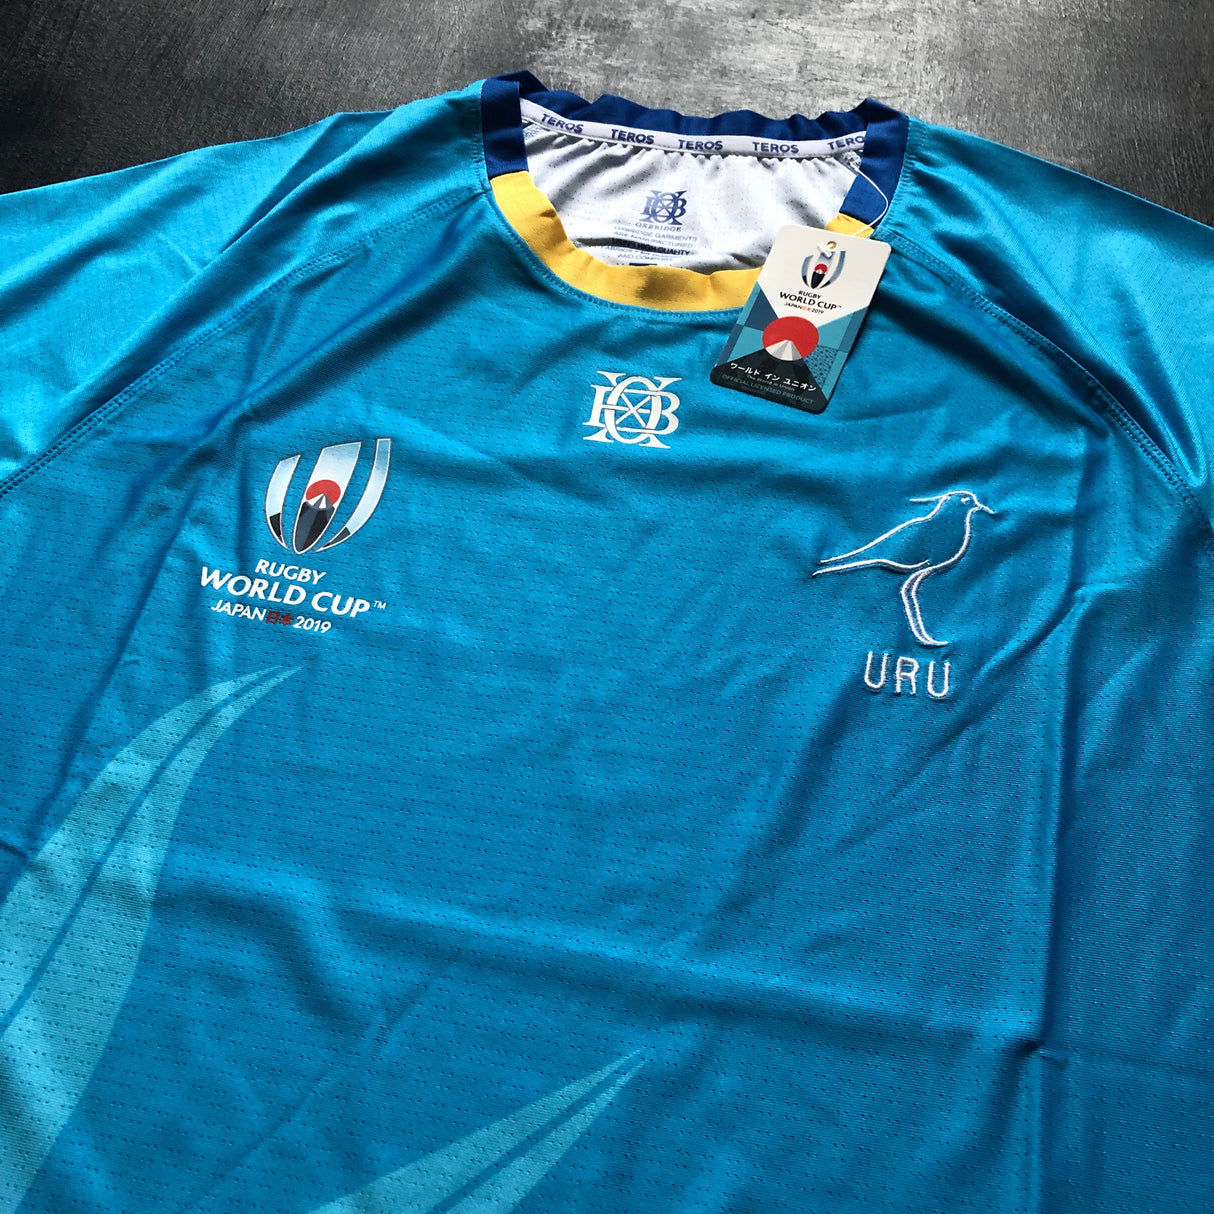 Uruguay National Rugby Team Jersey 2019 Rugby World Cup XL BNWT Underdog Rugby - The Tier 2 Rugby Shop 